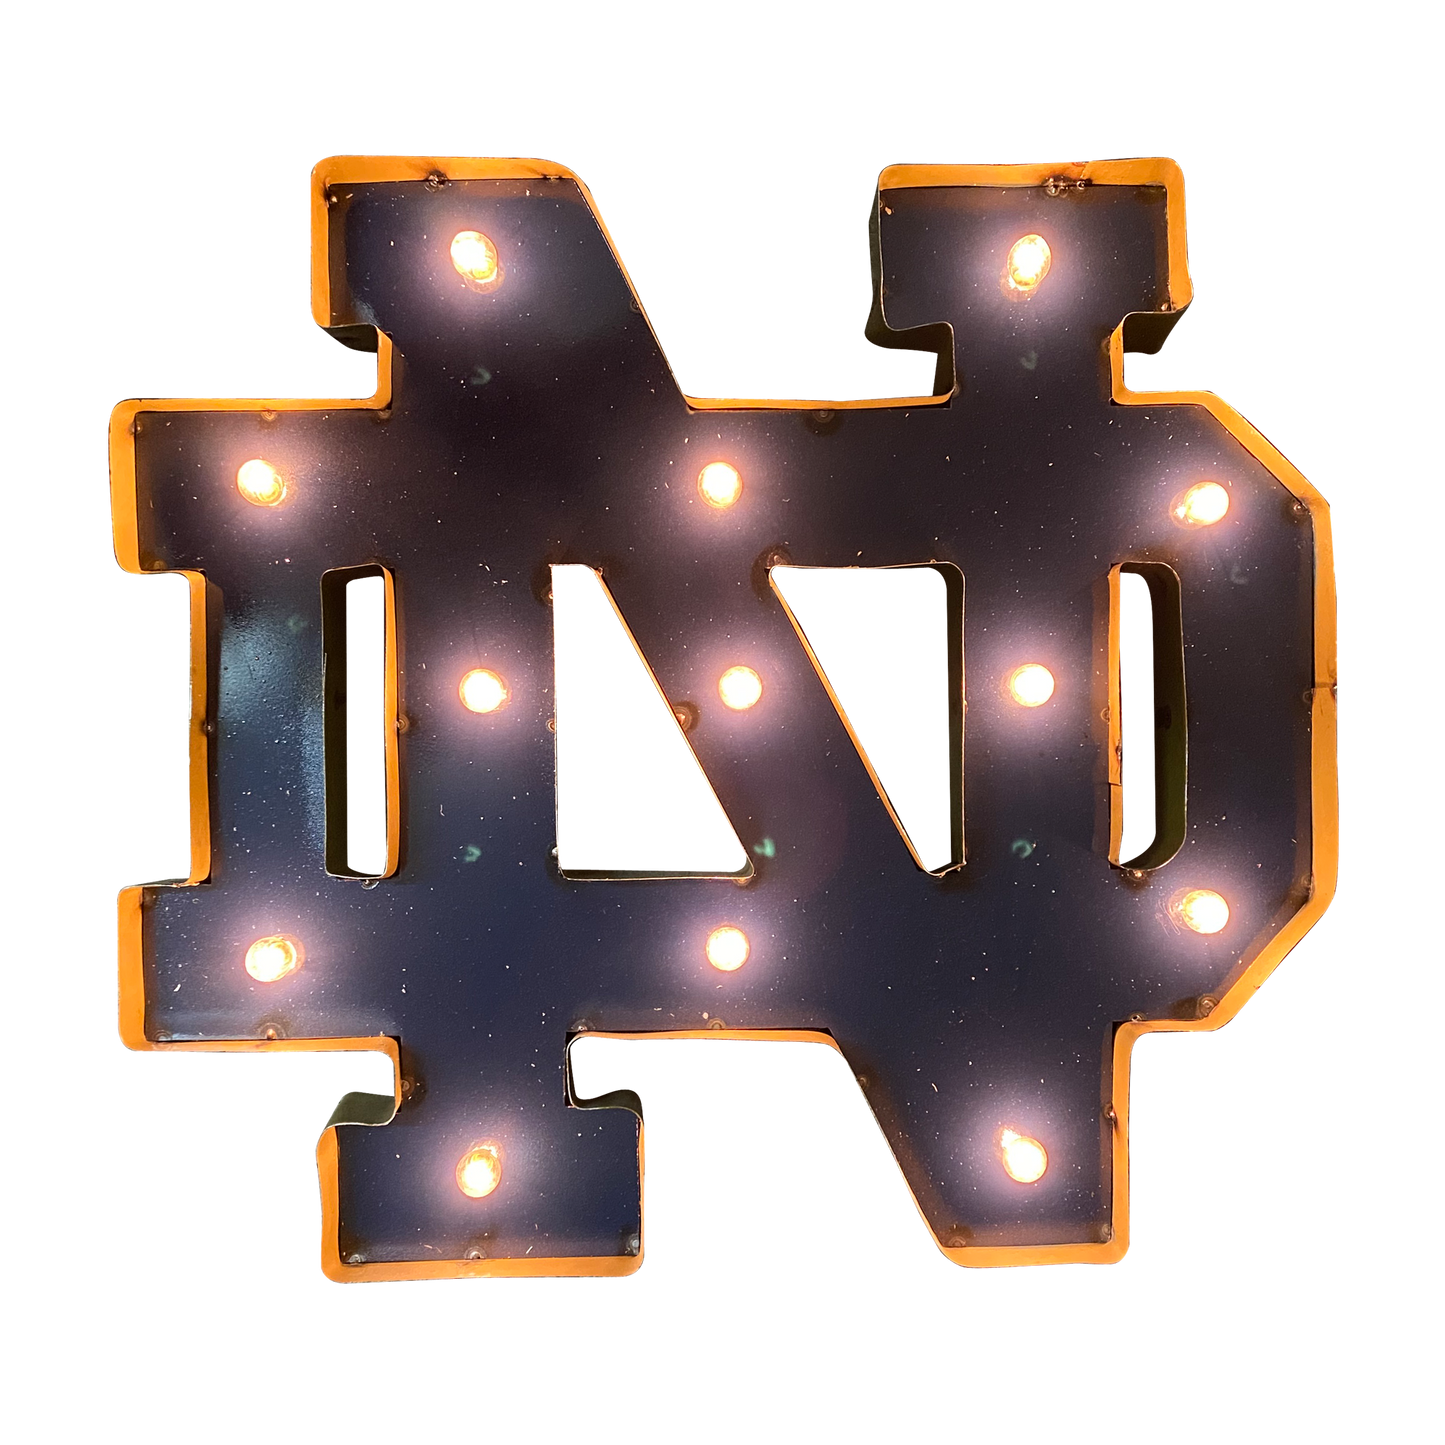 University of Notre Dame "ND" Lighted Recycled Metal Wall Decor